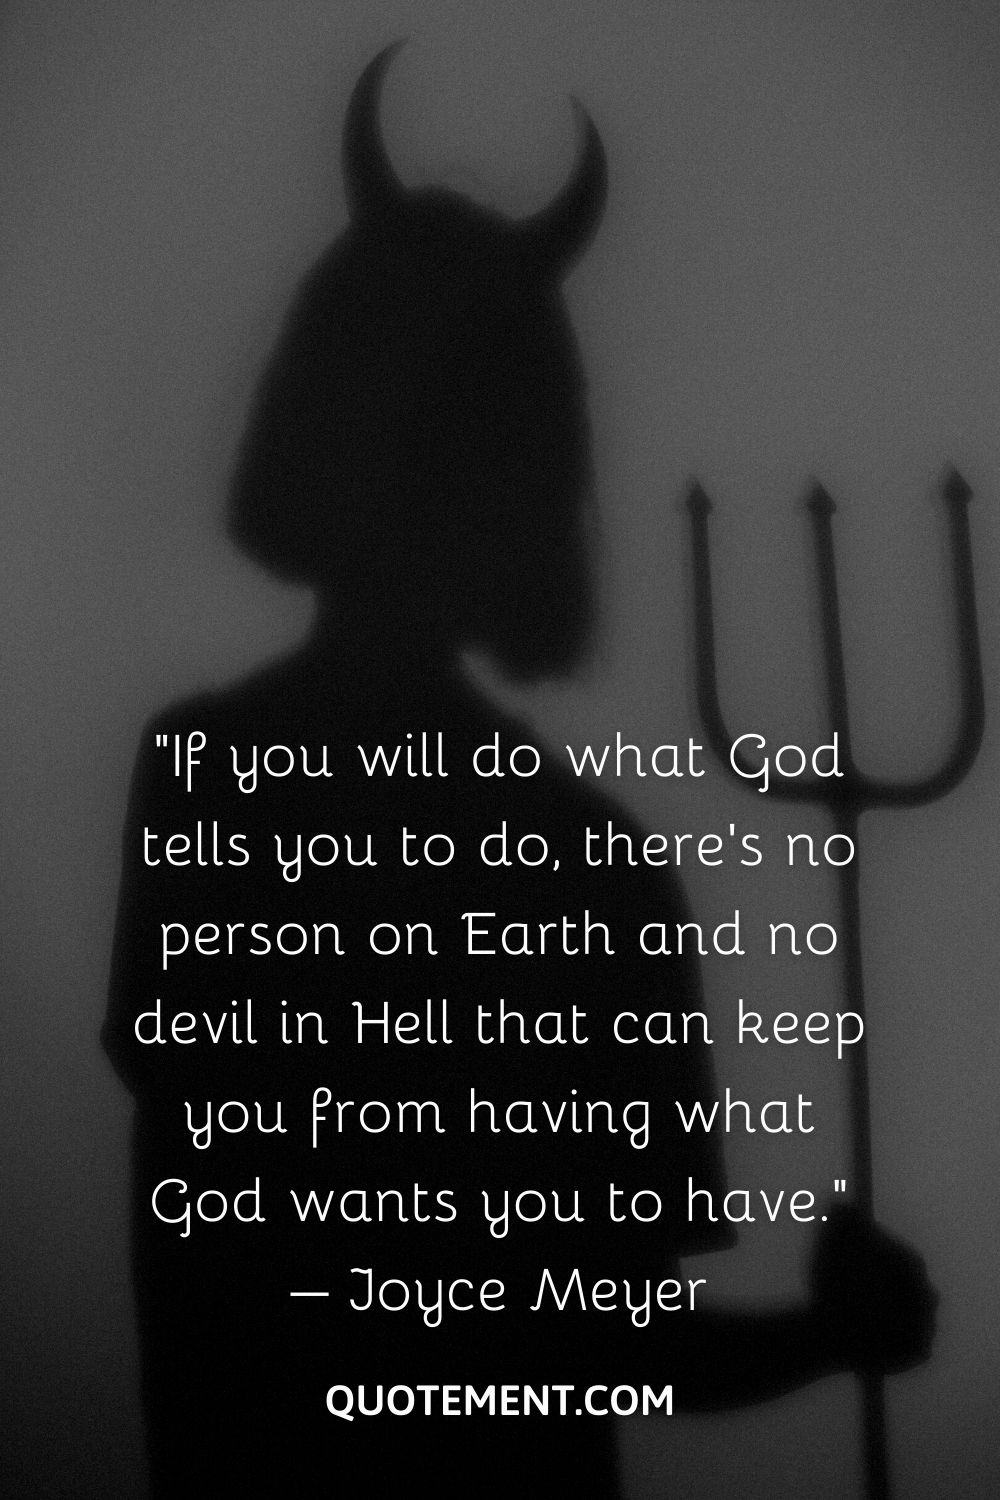 “If you will do what God tells you to do, there’s no person on Earth and no devil in Hell that can keep you from having what God wants you to have.” – Joyce Meyer